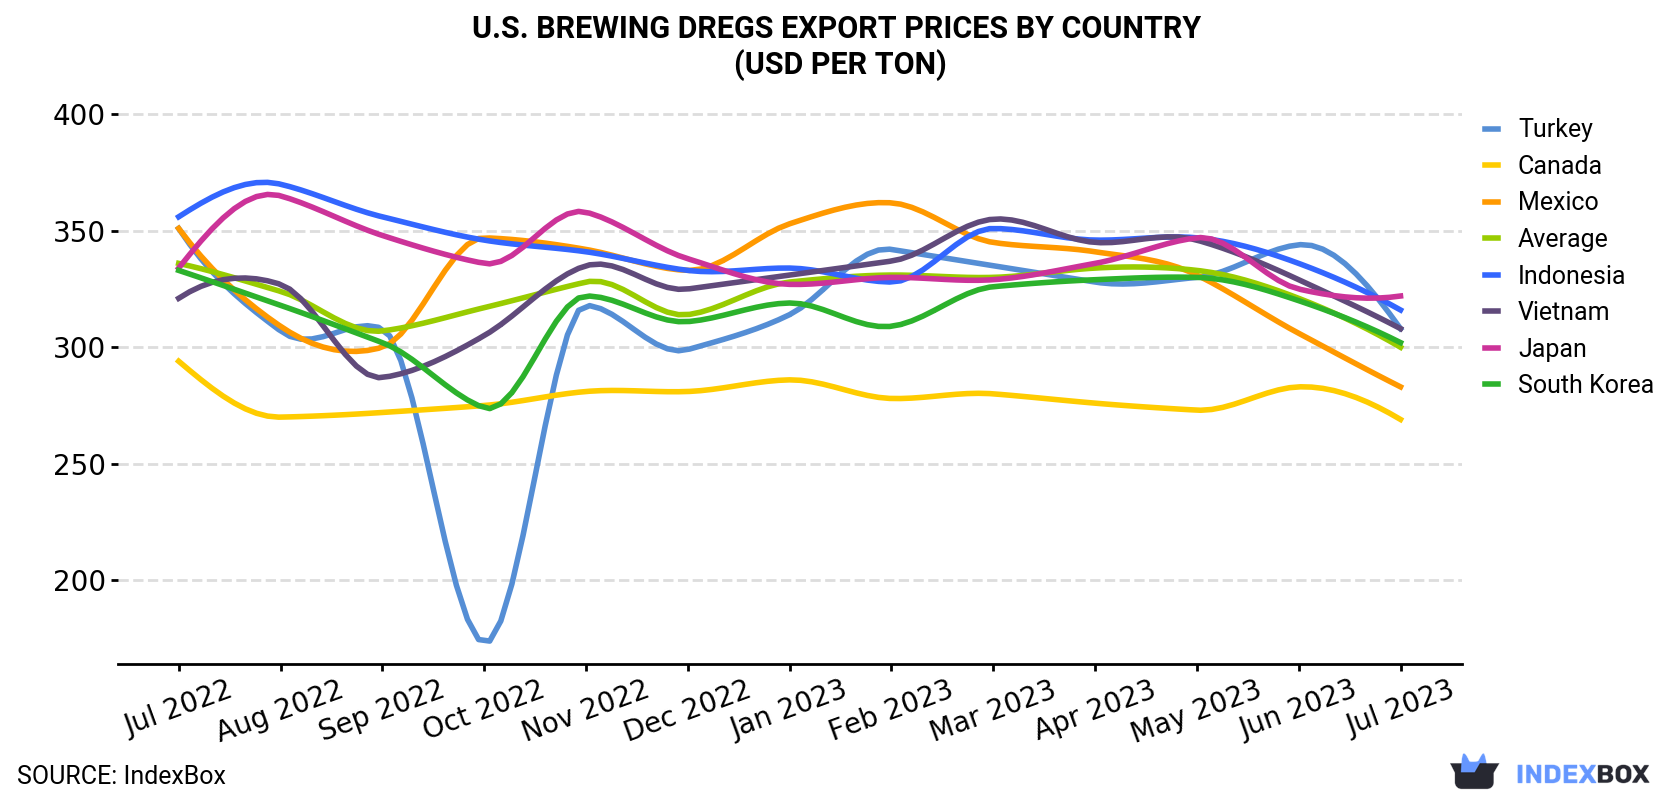 U.S. Brewing Dregs Export Prices By Country (USD Per Ton)